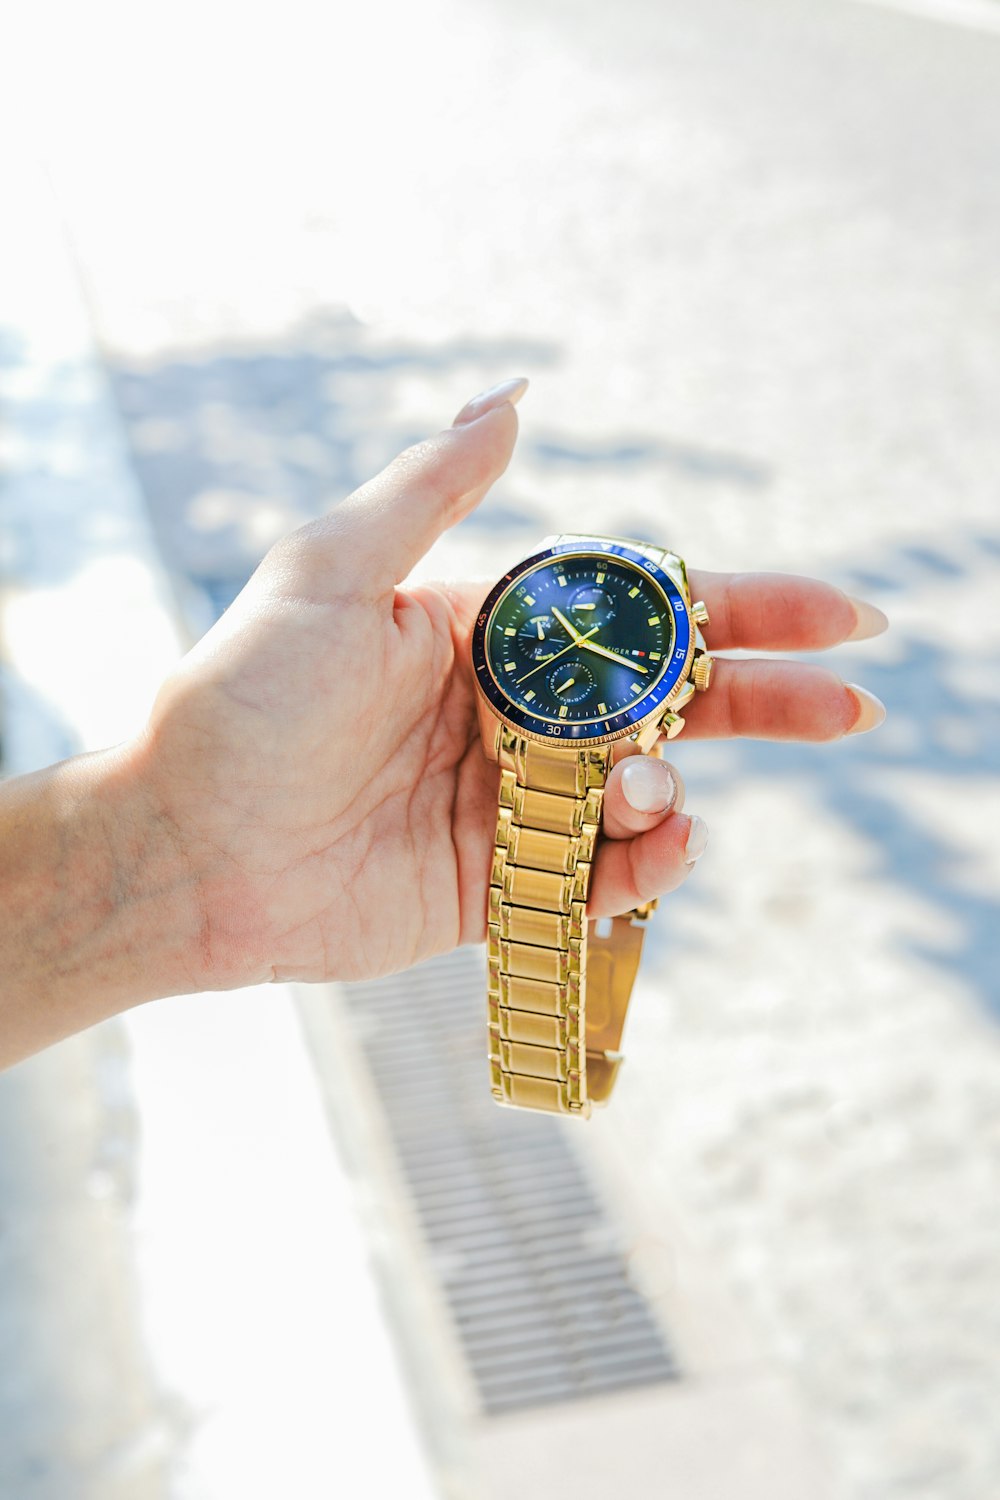 person holding gold and black analog watch